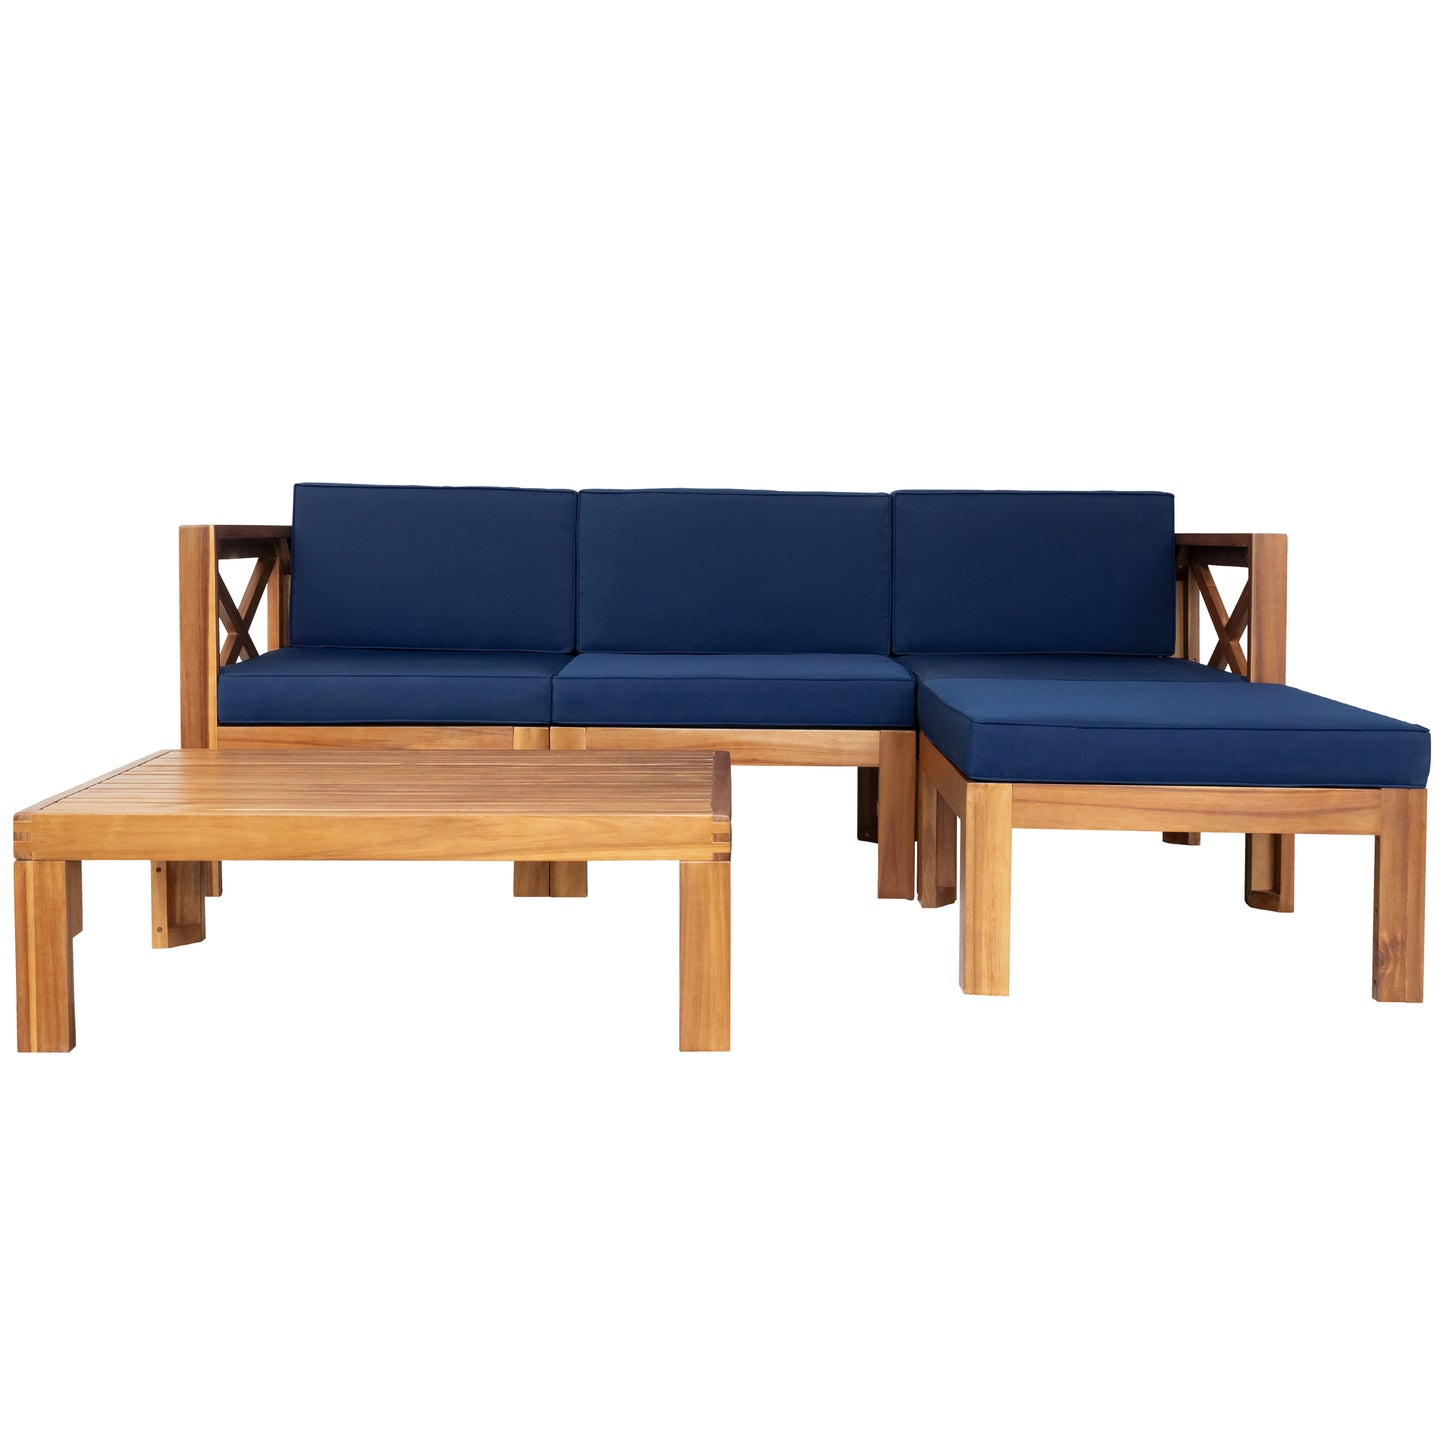 5-Piece Wood Outdoor Sectional Sofa Patio Set with Blue Cushions